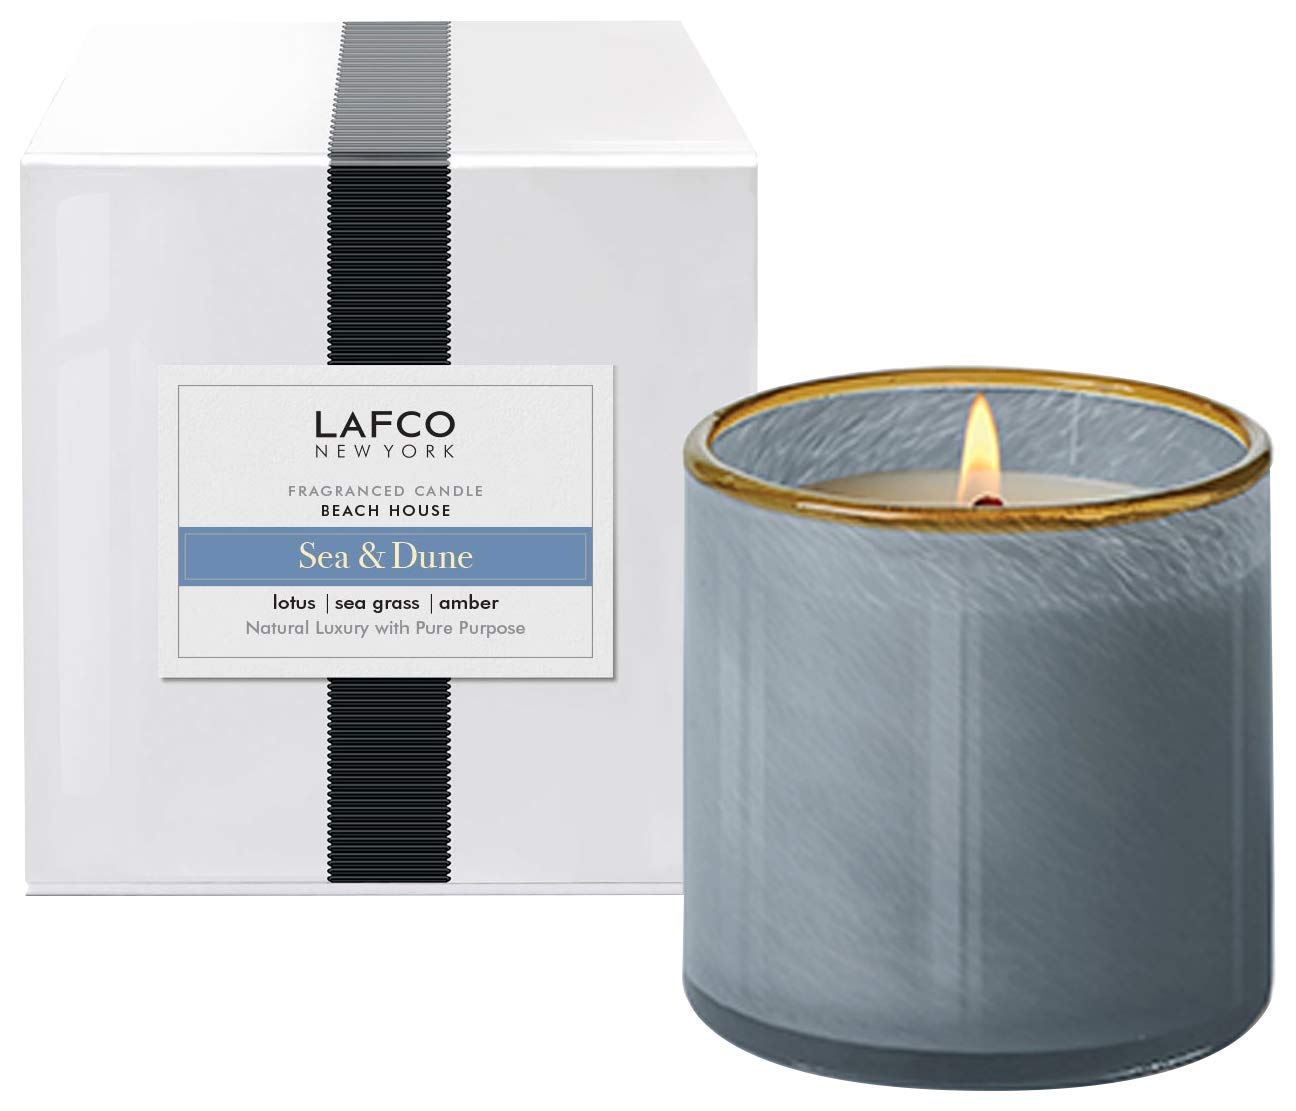 LAFCO NEW YORK - Classic Scented Soy Wax Candle in Beach House Sea & Dune (6.5 oz.)